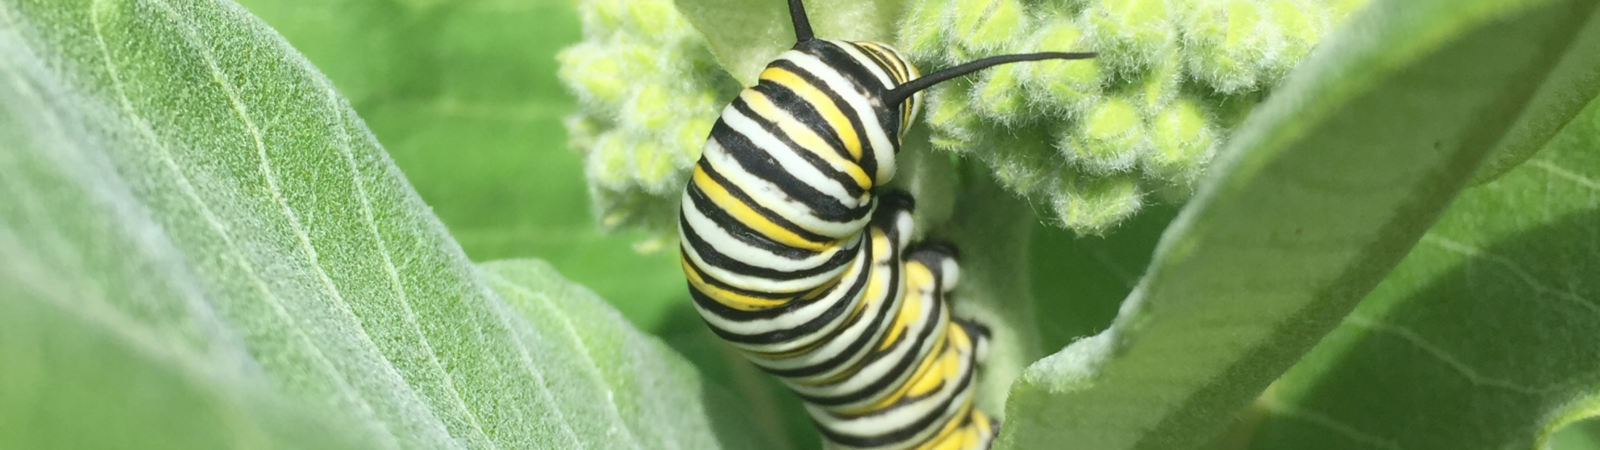 monarch caterpillar with black, yellow, and white stripes on green milkweed leaf